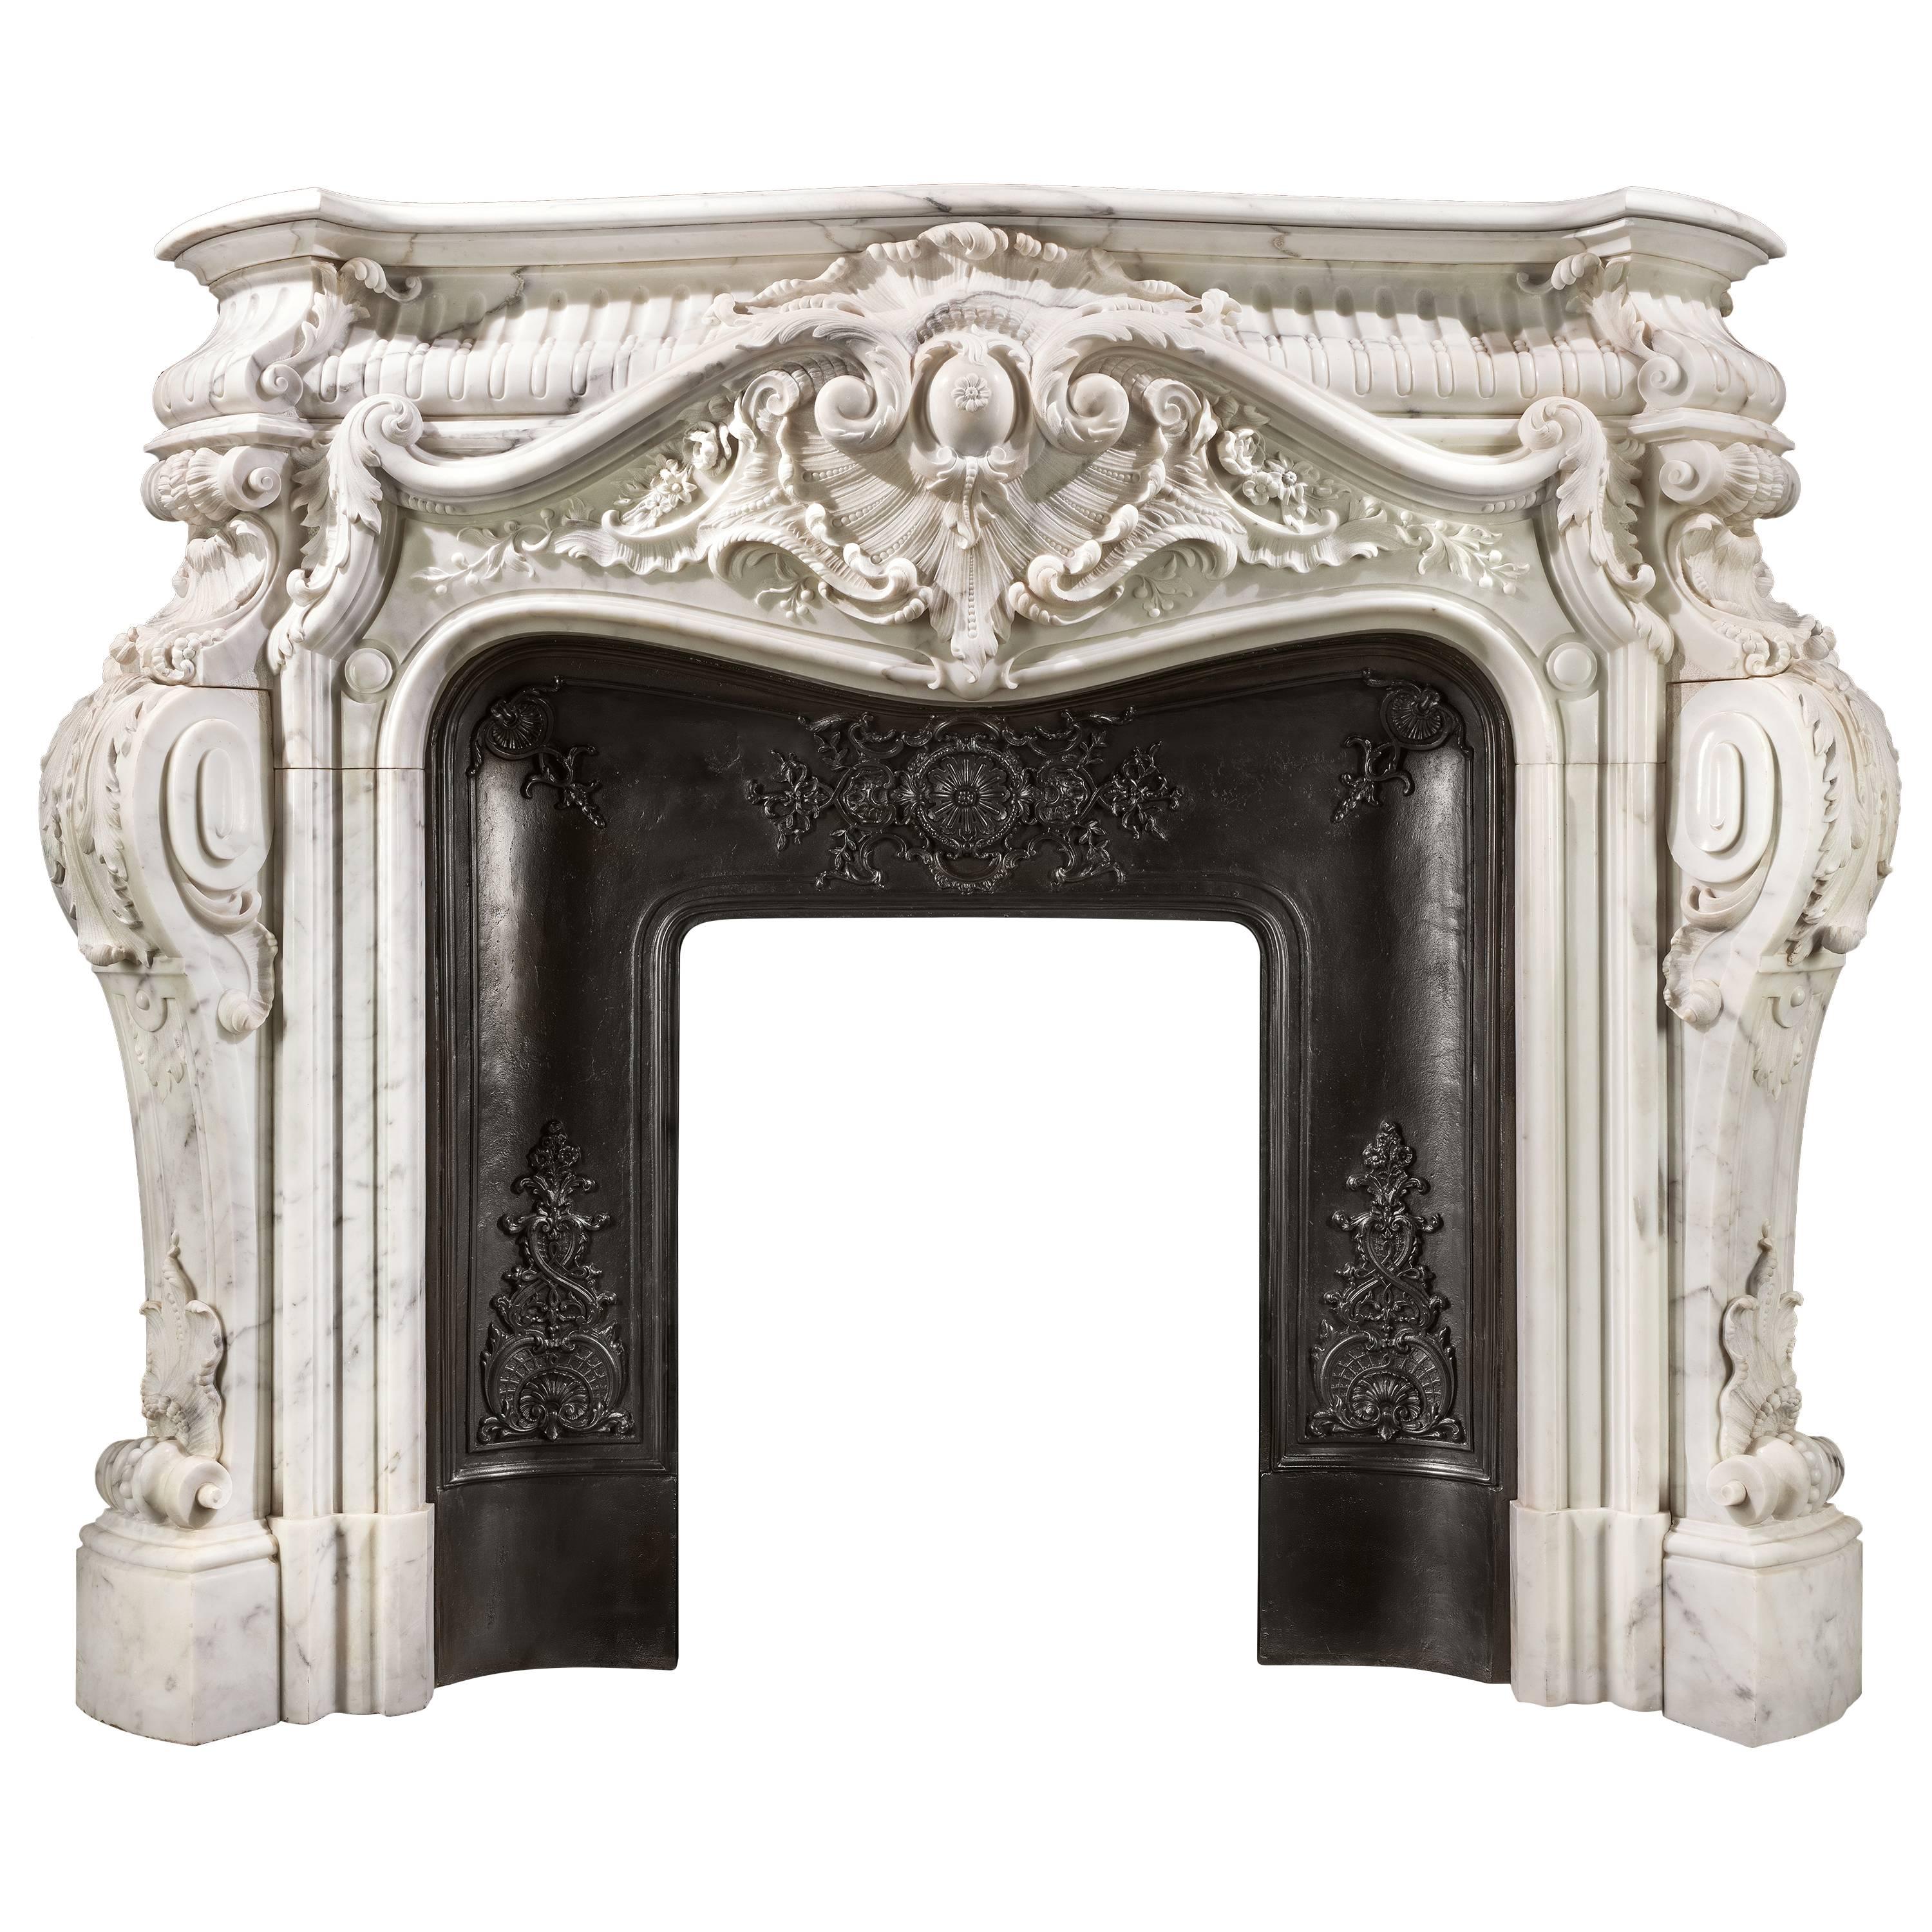 Large French Rococo Fireplace in Statuary Marble 